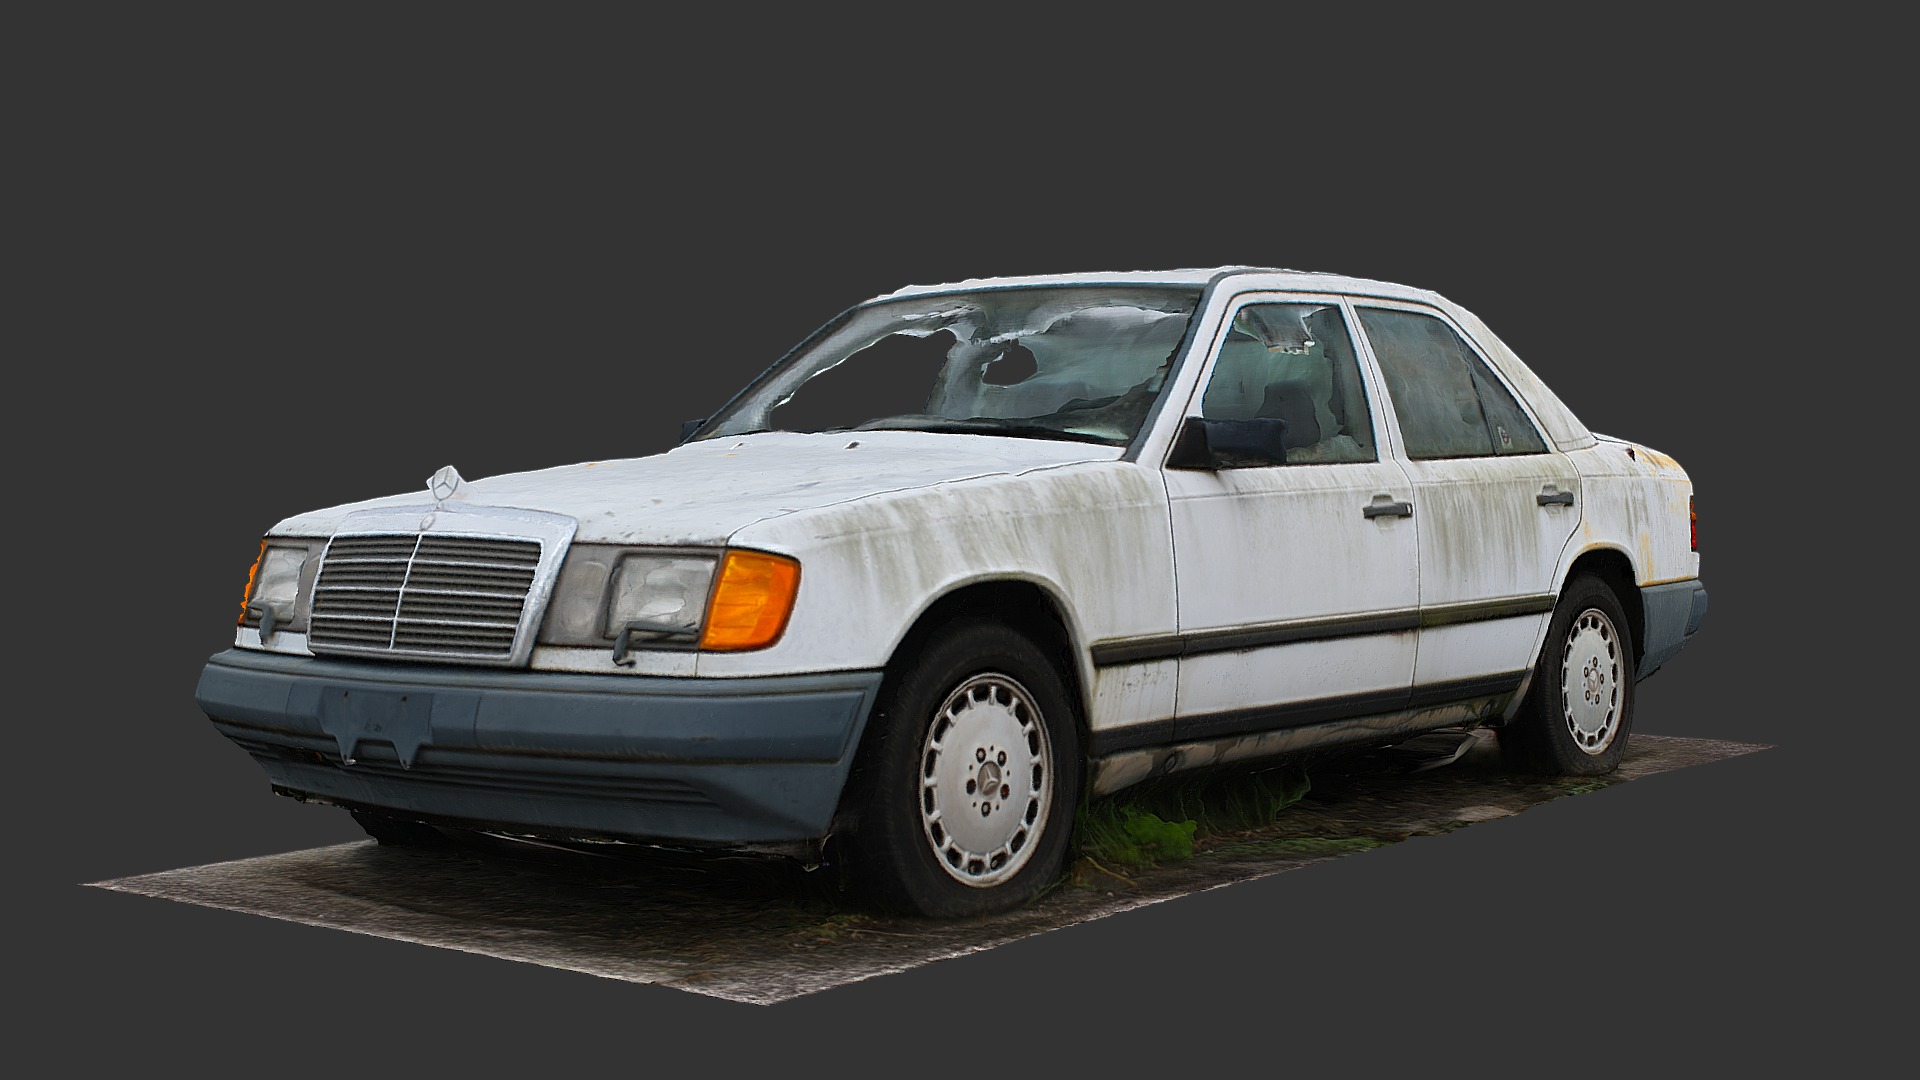 3D model Abandoned Car (Raw Scan) - This is a 3D model of the Abandoned Car (Raw Scan). The 3D model is about a white car parked on a road.